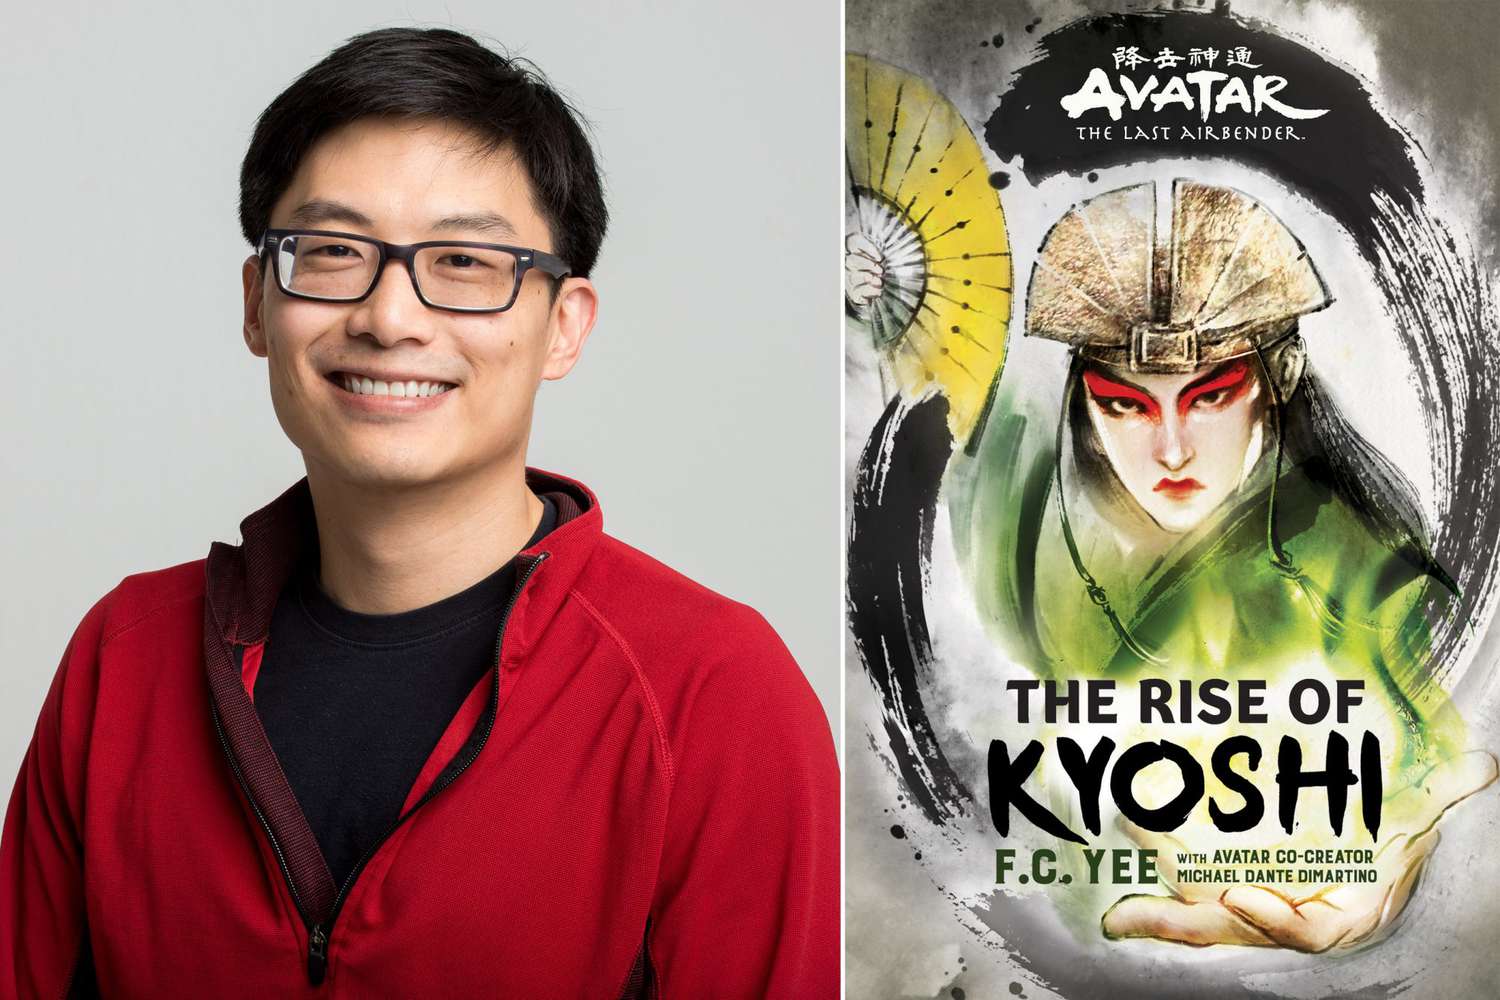 Avatar: The Last Airbender: The Rise of Kyoshi by F.C. Yee